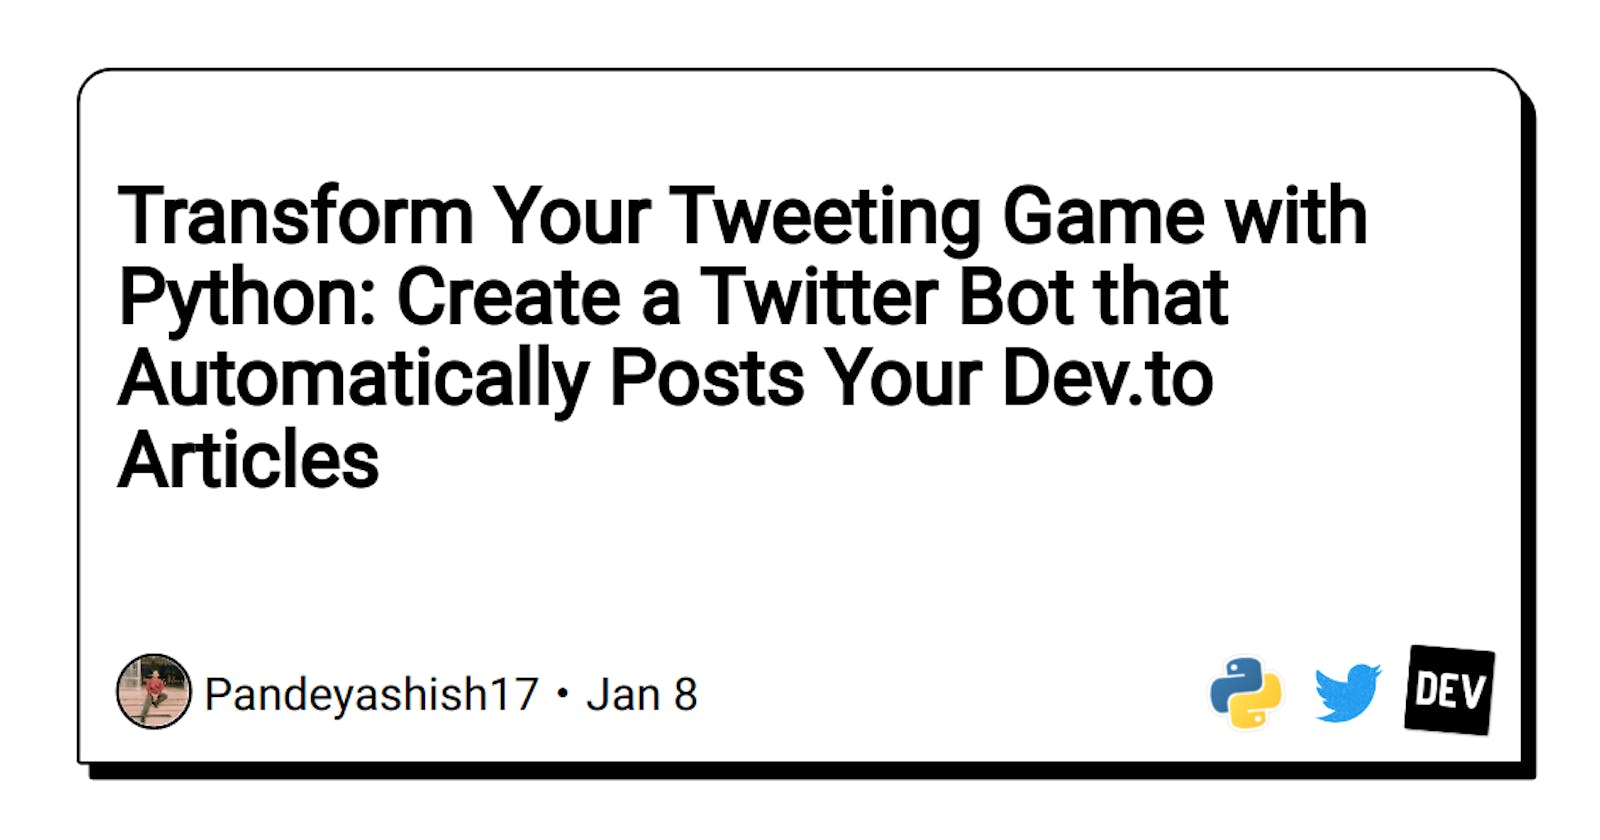 Transform Your Tweeting Game with Python: Create a Twitter Bot that Automatically Posts Your Dev.to Articles